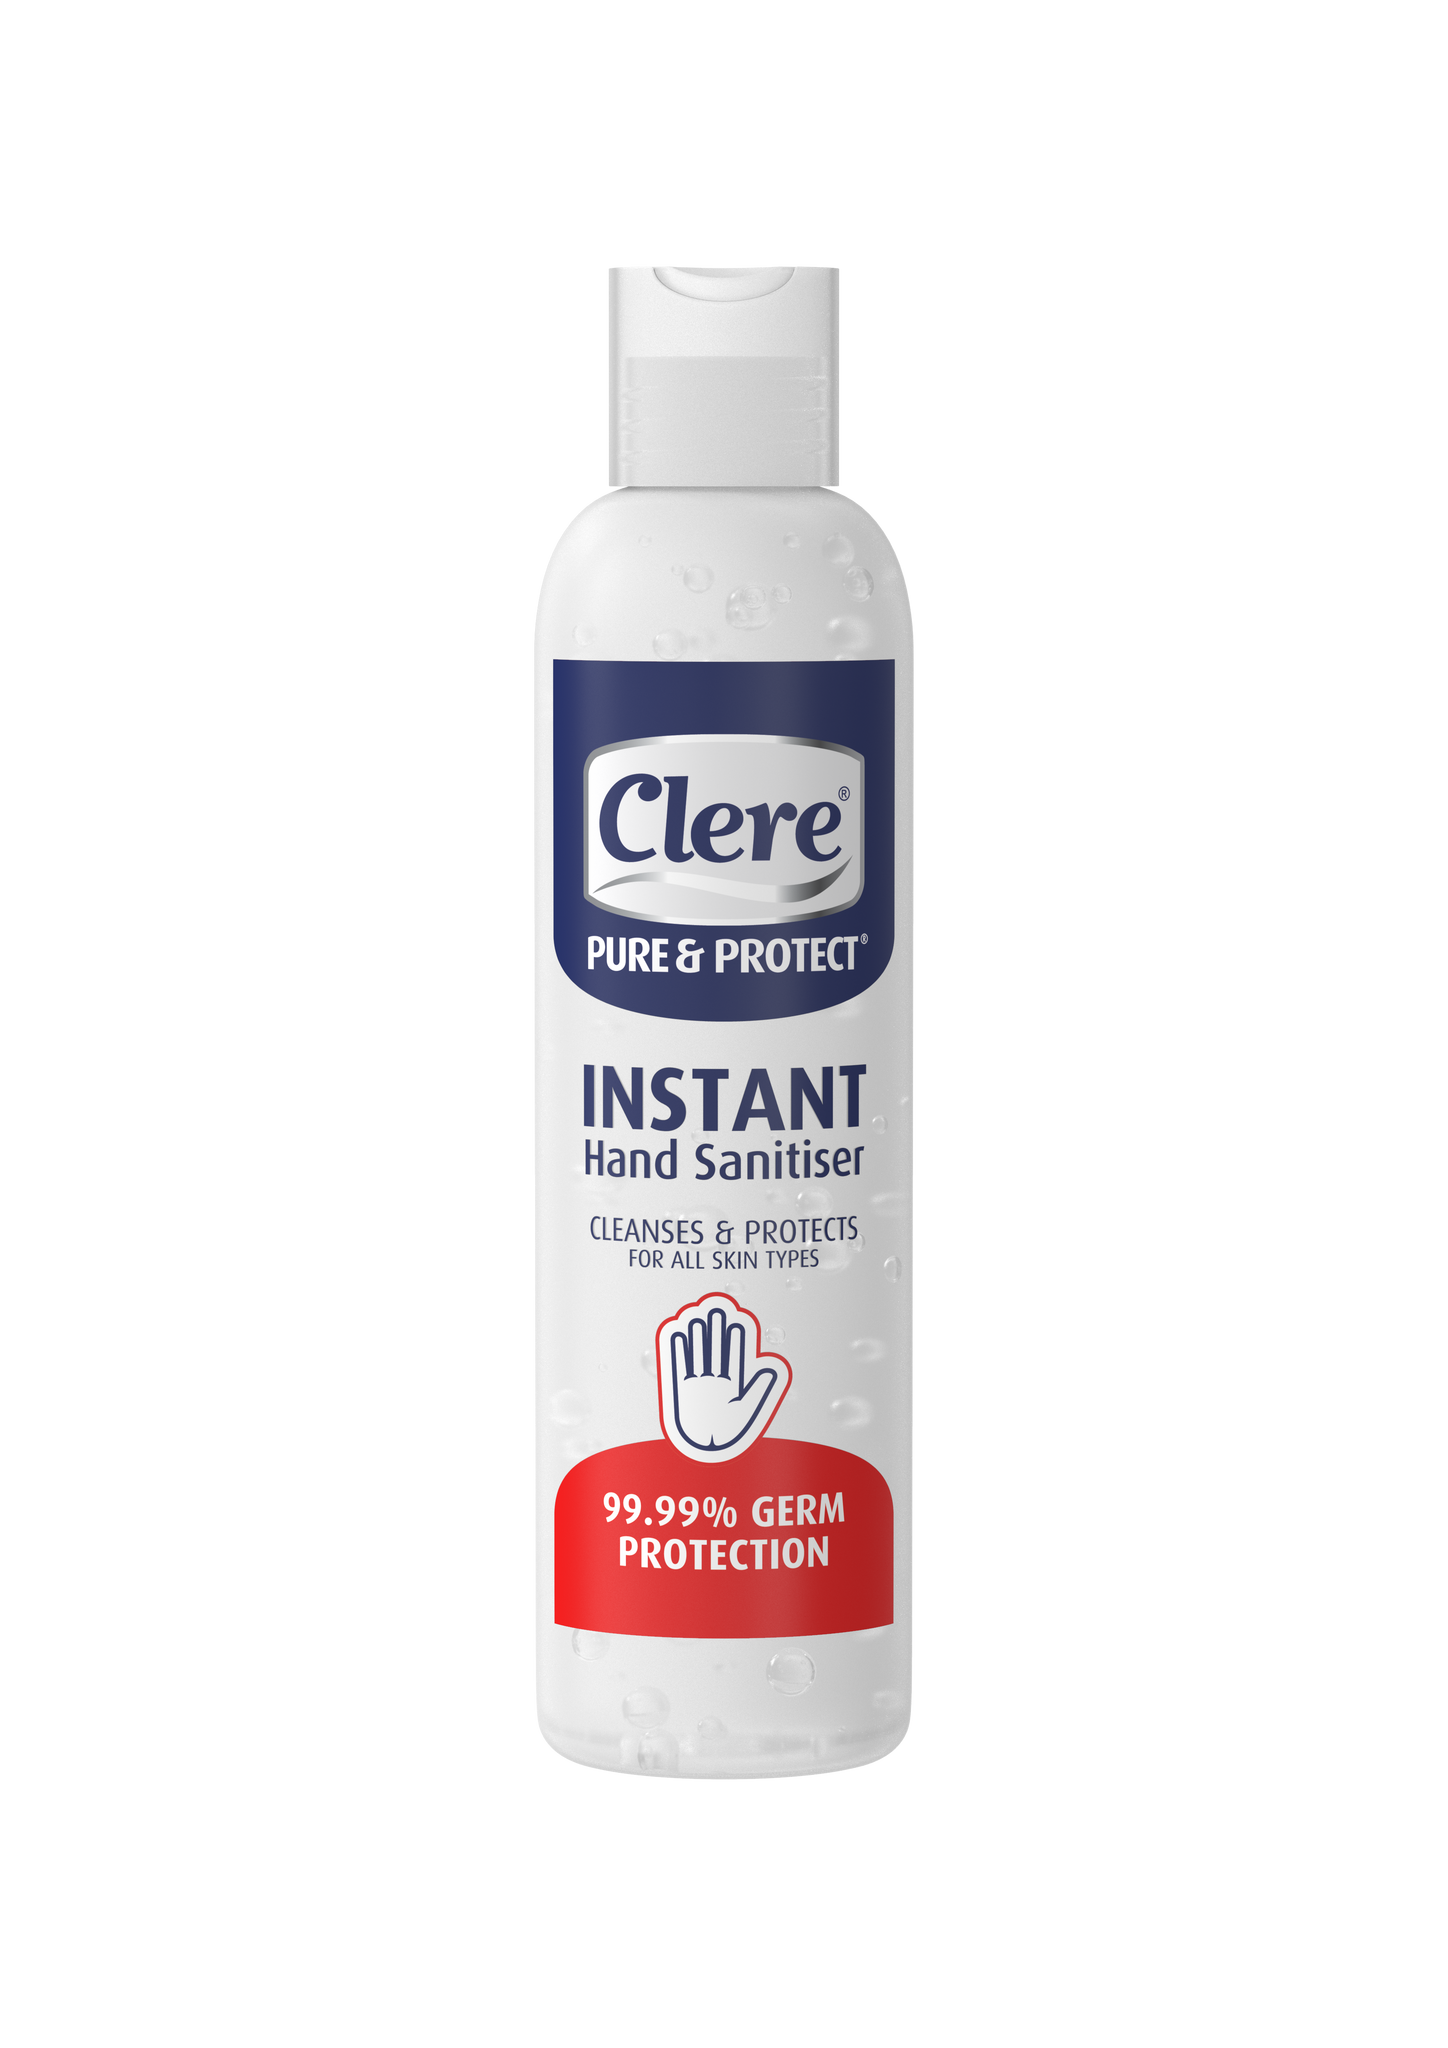 Clere Pure & Protect Instant Hand Sanitiser (Round bottle) - Gel - 250ml 12-Pack